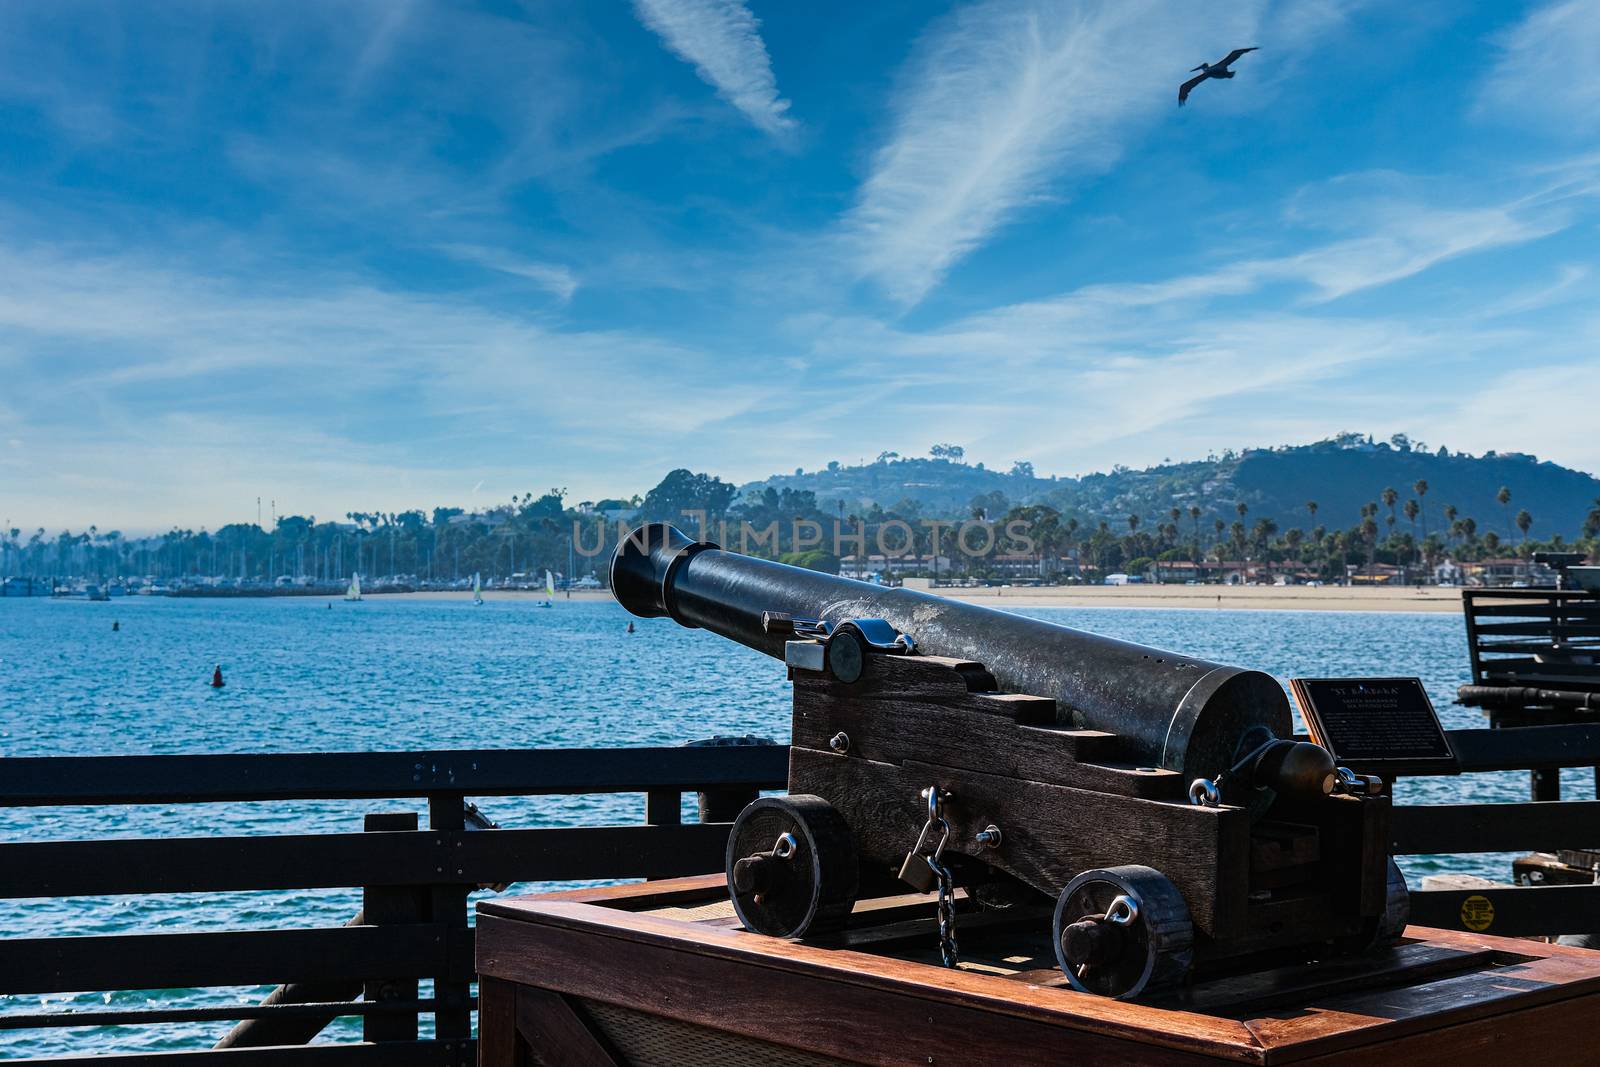 An old Cannon on Pier in Santa Barbara